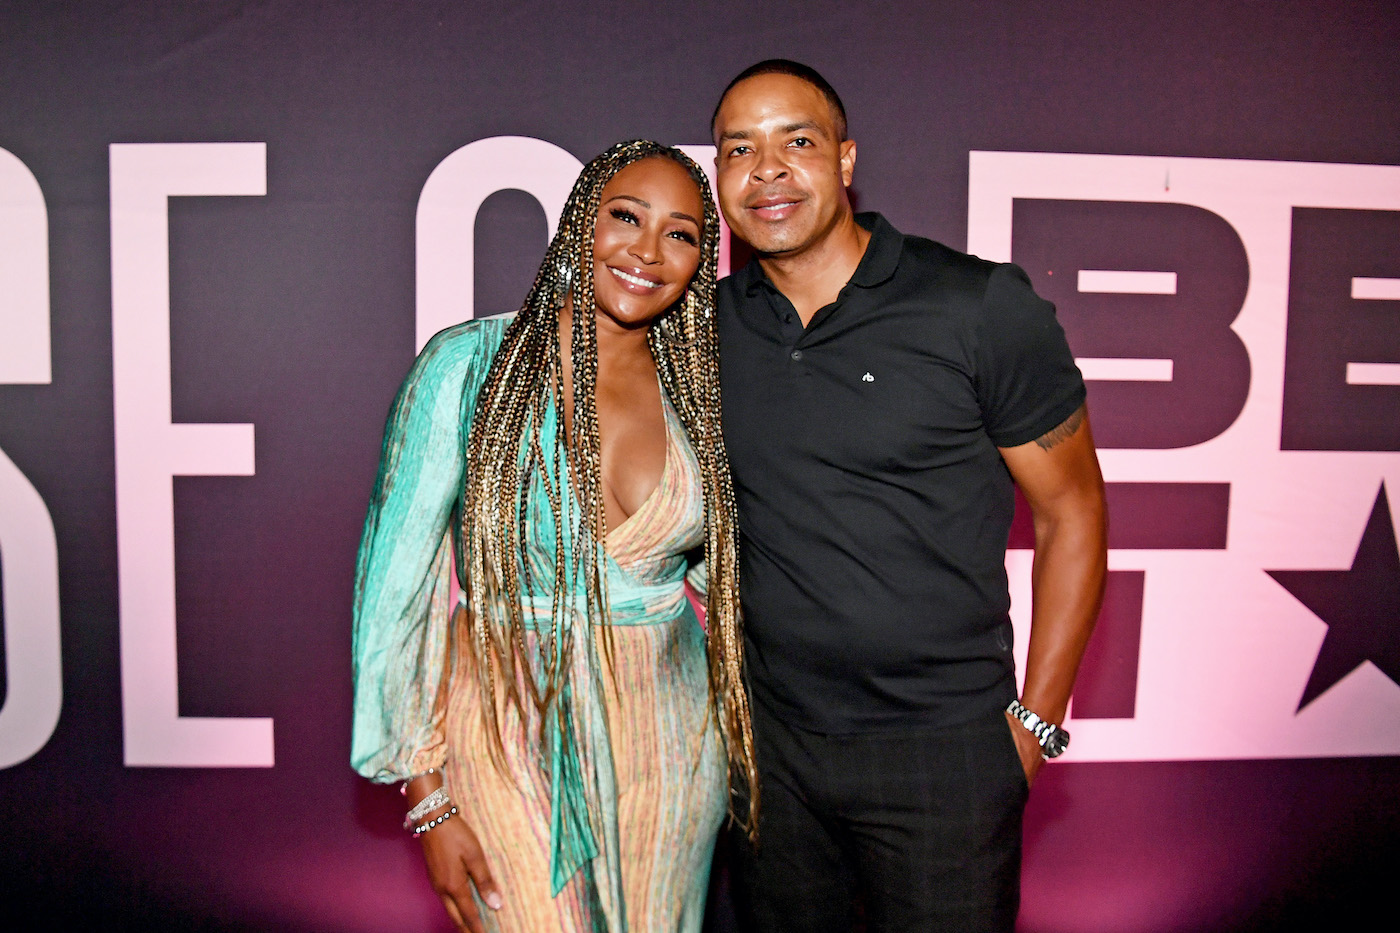 Cynthia Bailey and Mike Hill pose for a photo during a red carpet event.